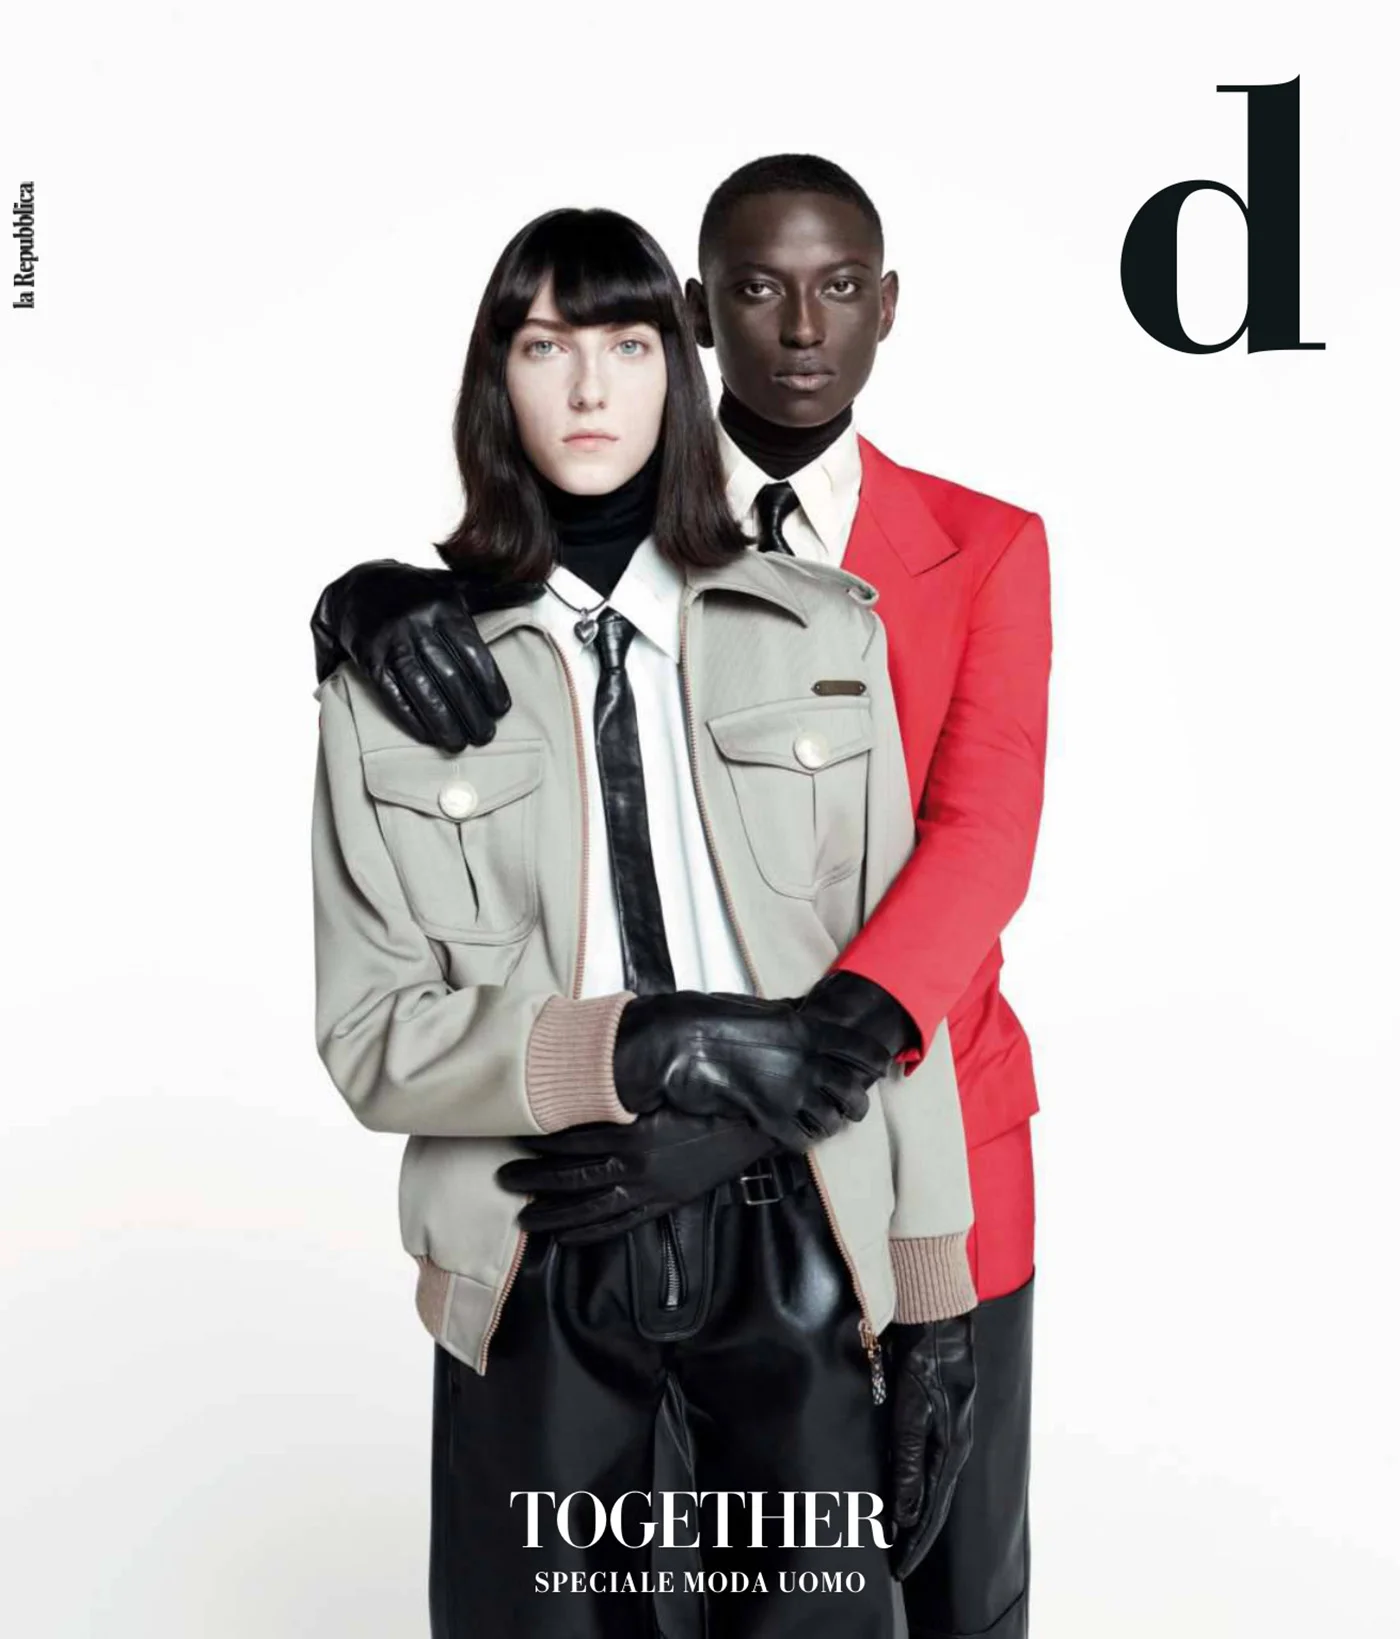 D la Repubblica June 18th, 2022 covers by Willy Vanderperre